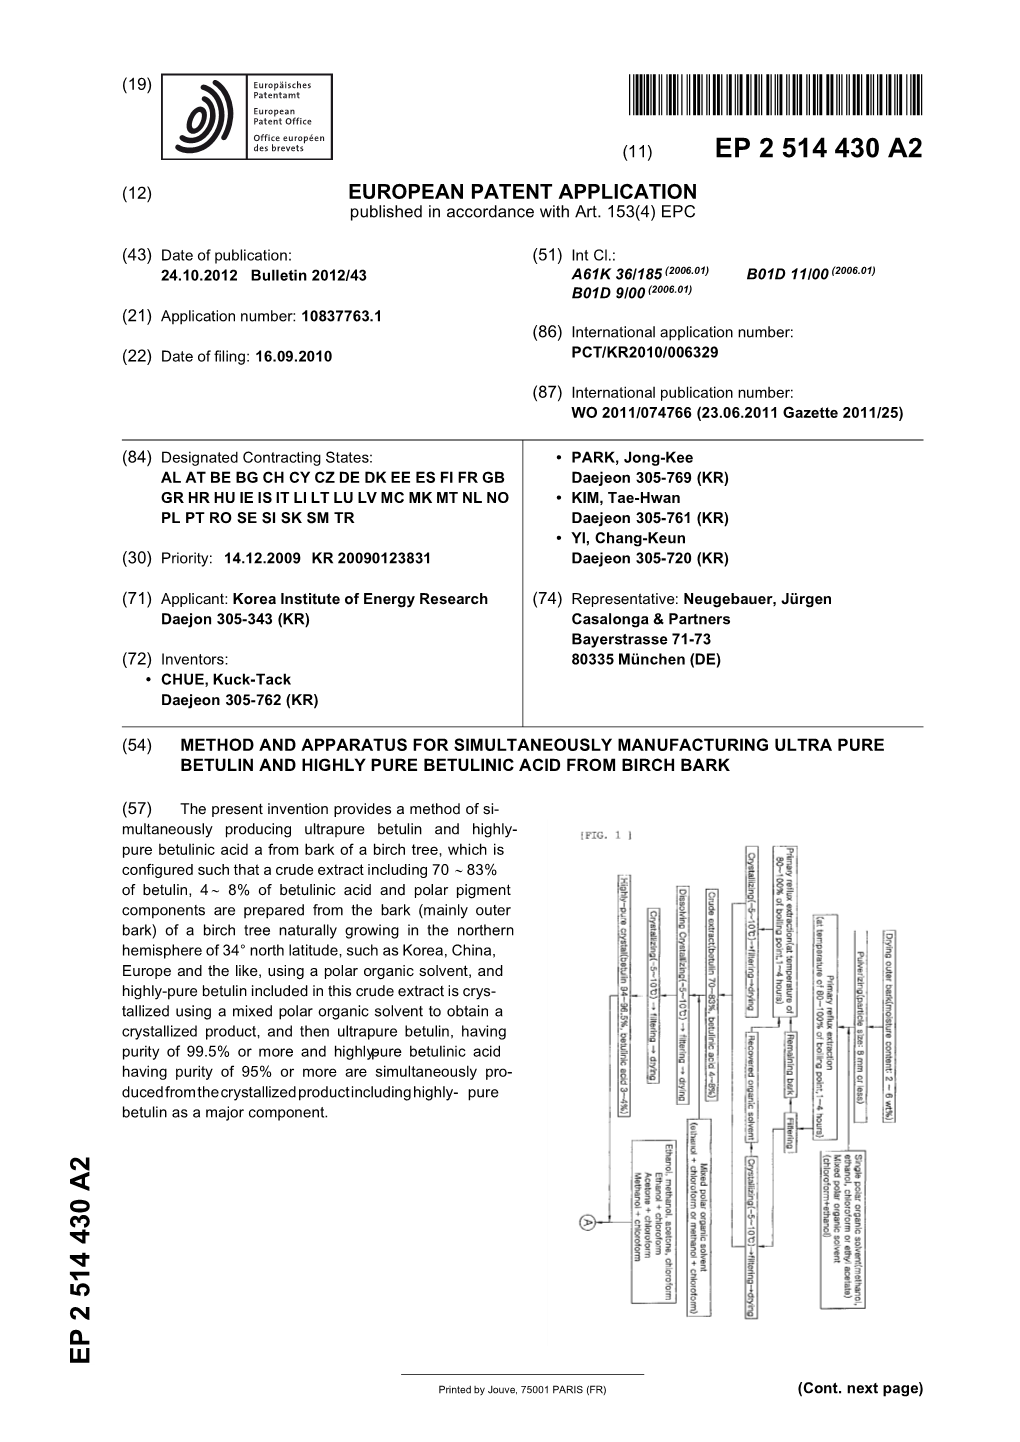 EUROPEAN PATENT APPLICATION Published in Accordance with Art